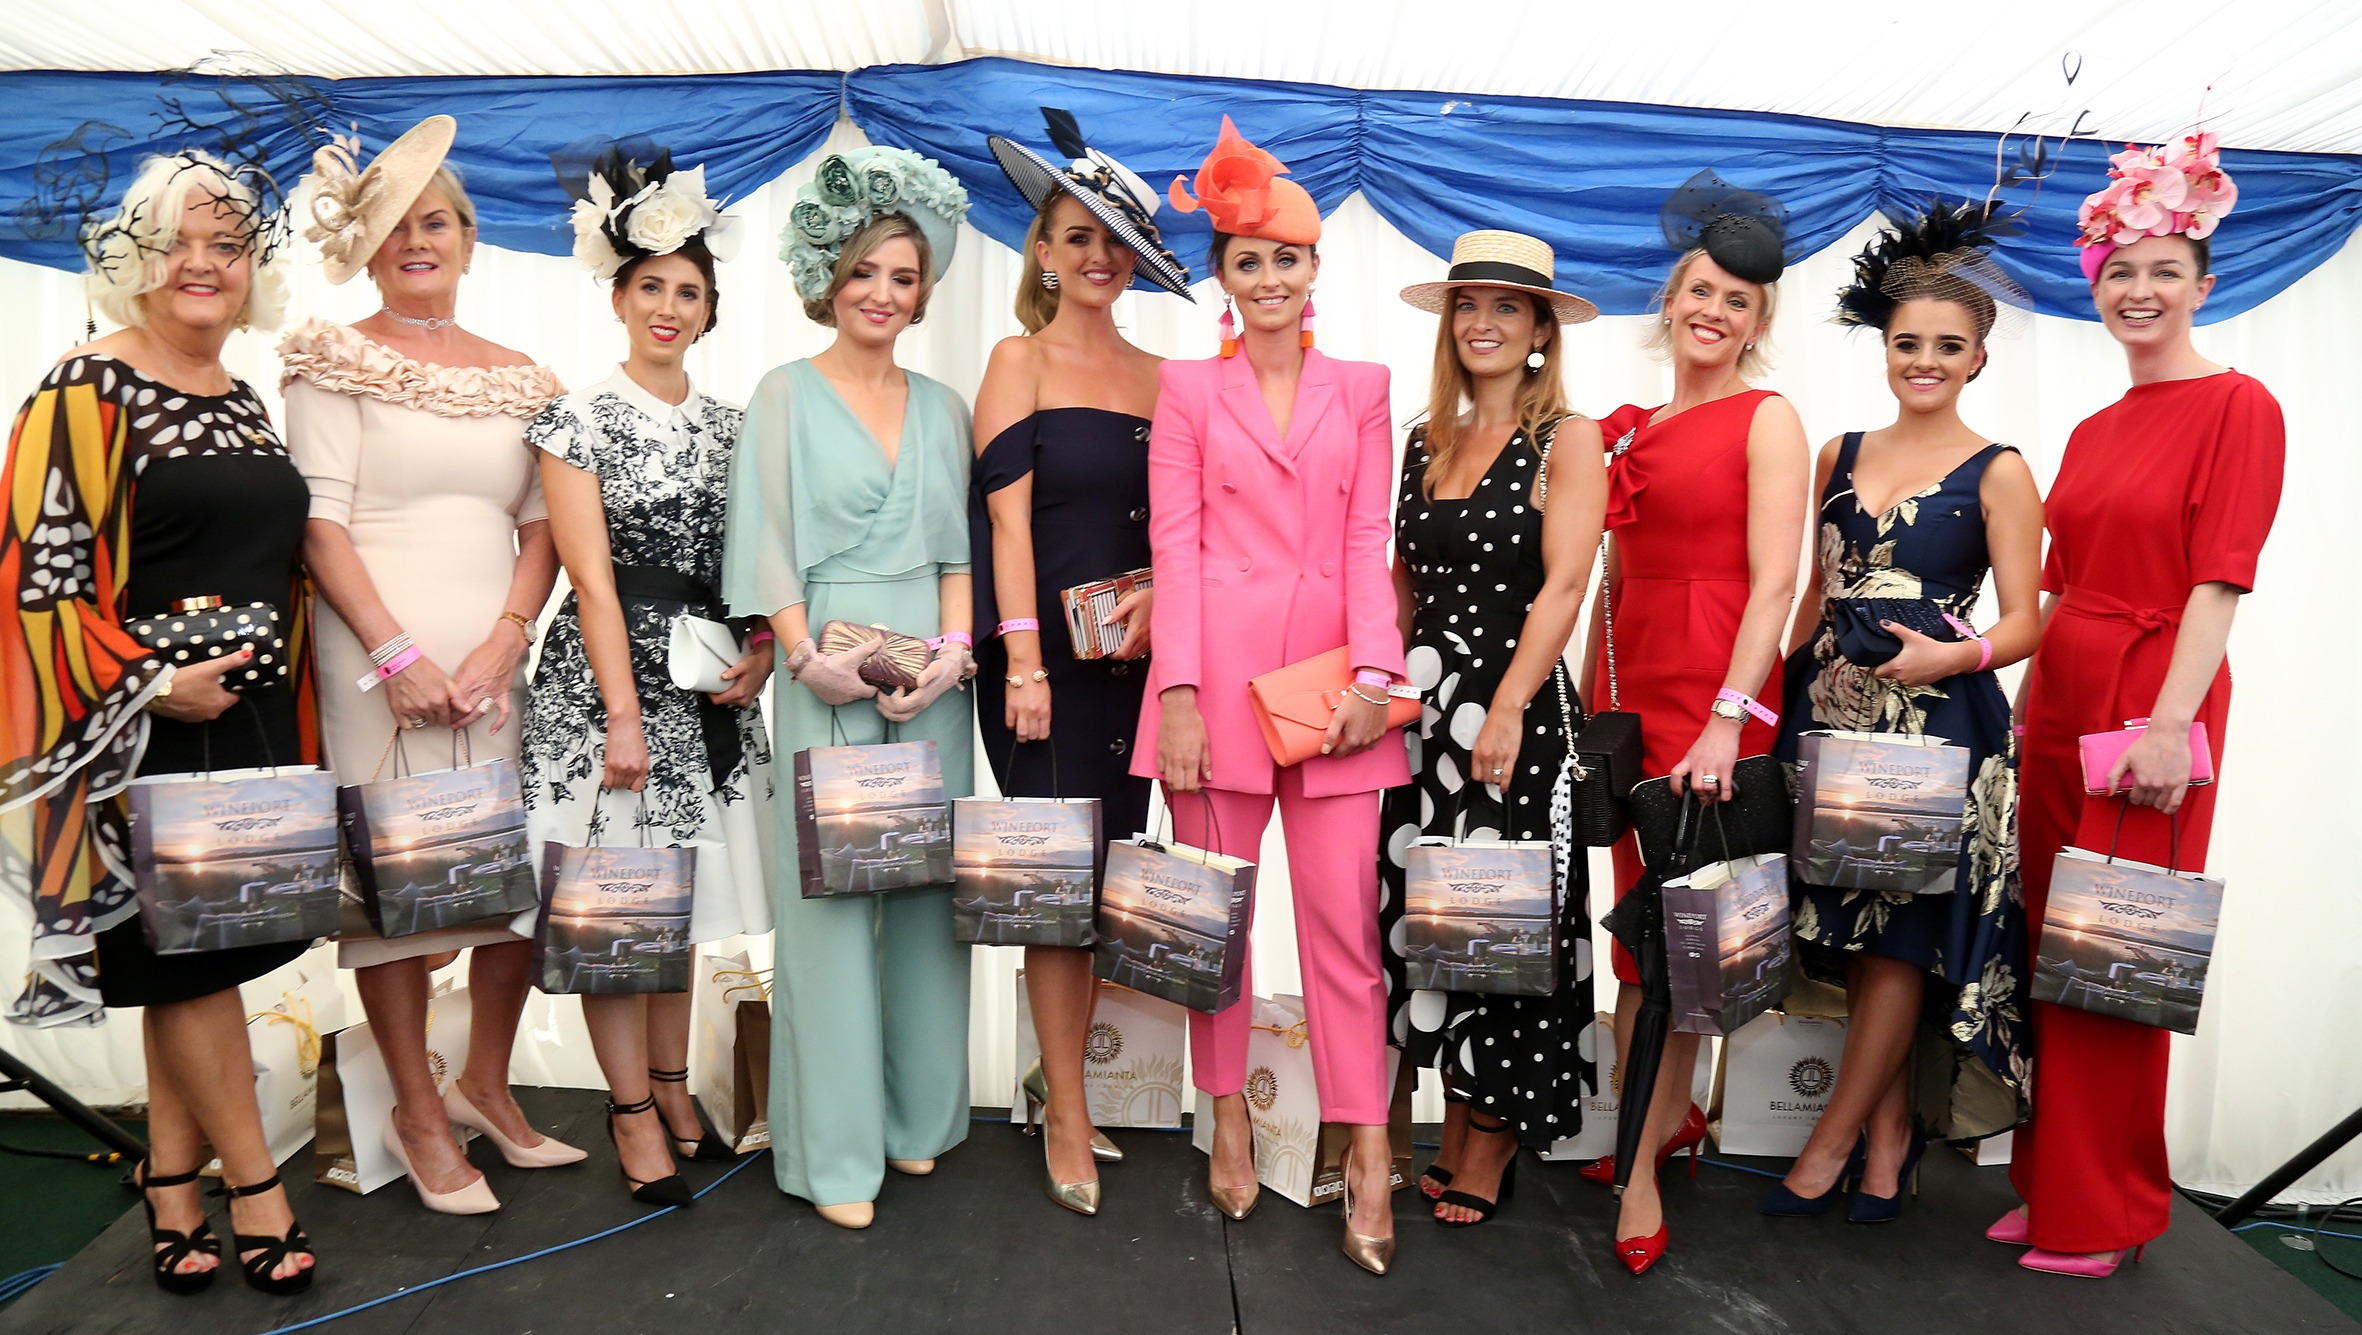 GALLERY: Ladies brave the weather at the Bellamianta Ladies' Sustainable  Style Competition at the Kilbeggan Races